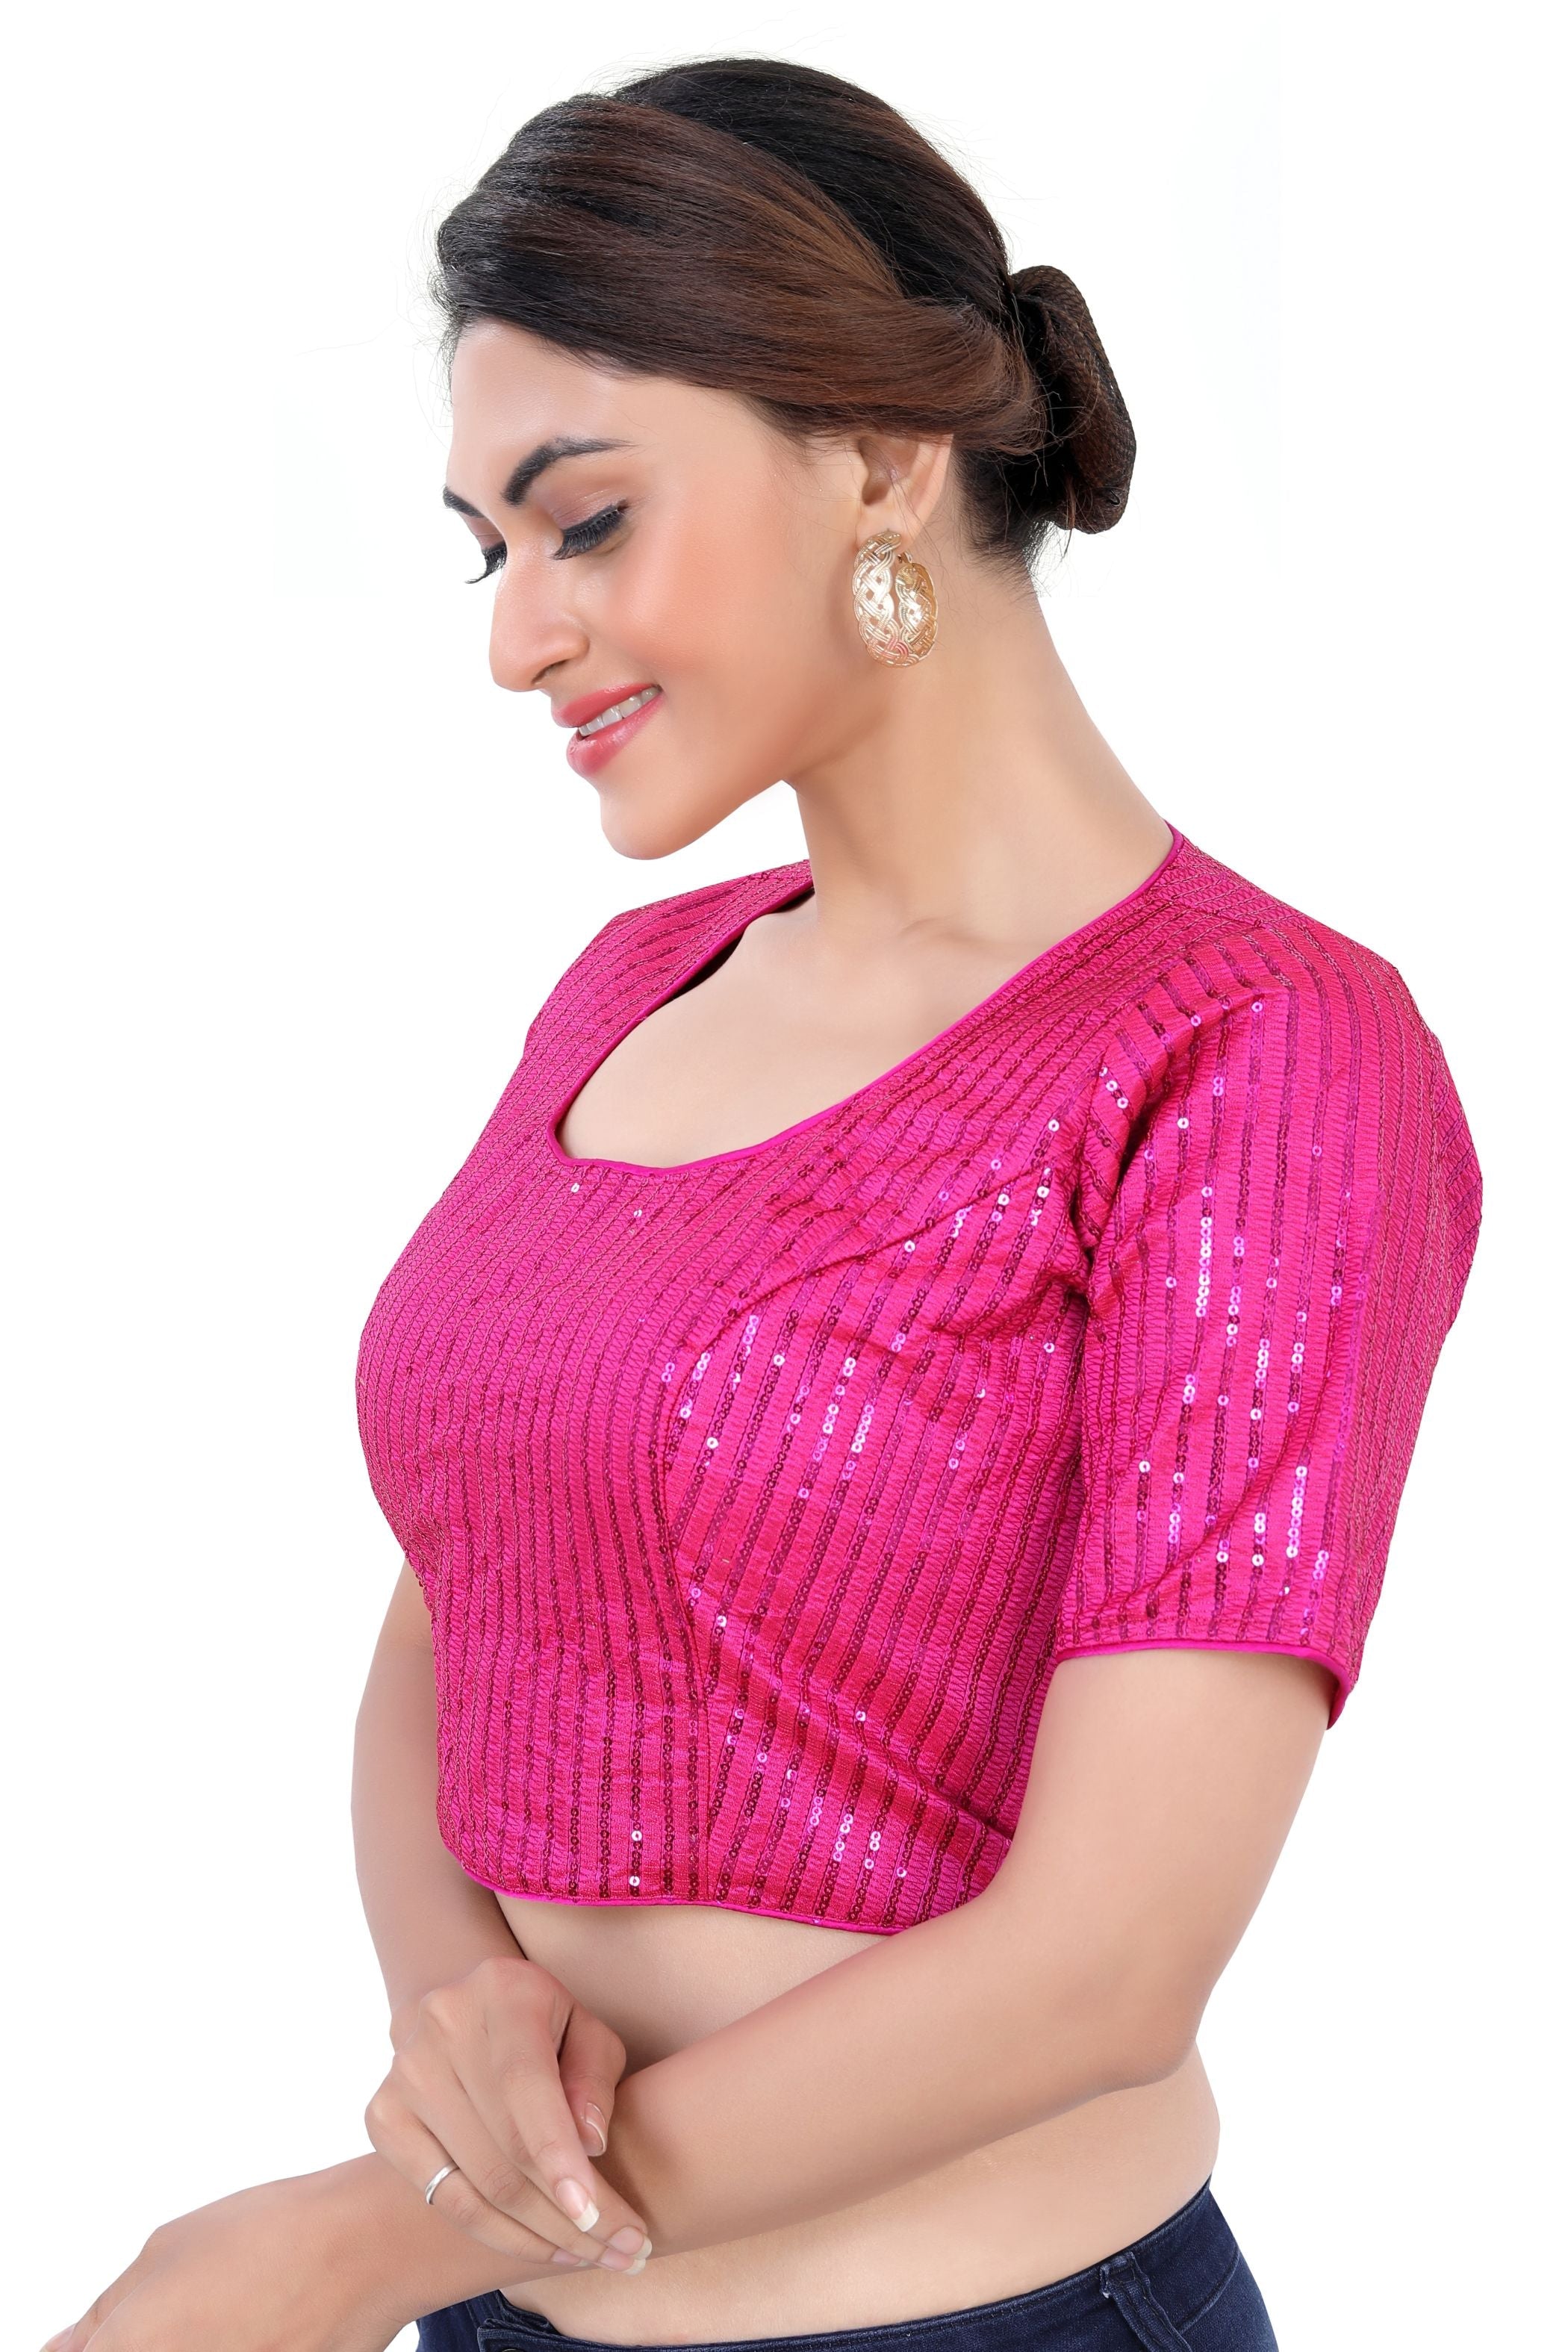 Women's Art Silk Sequin Blouse for partywear sarees in Hot Pink Color